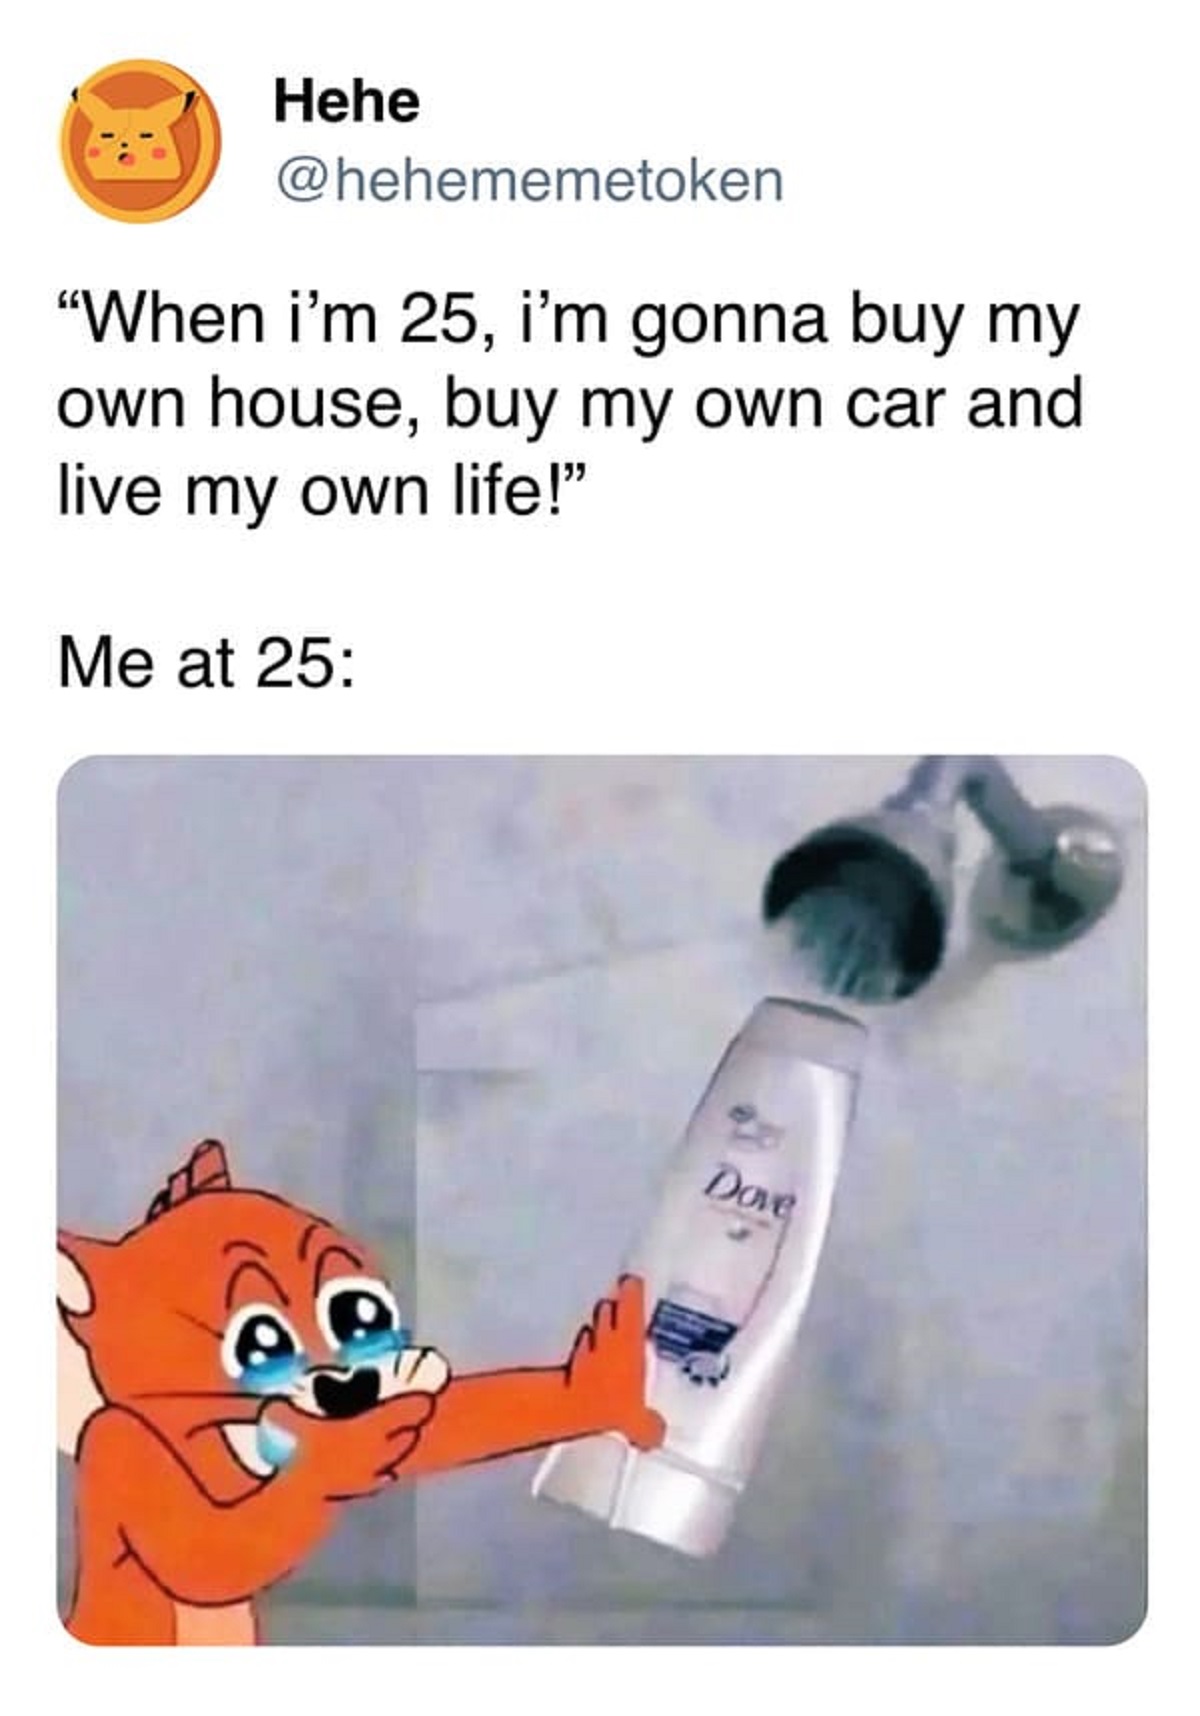 cartoon - Hehe "When i'm 25, i'm gonna buy my own house, buy my own car and live my own life!" Me at 25 Dove